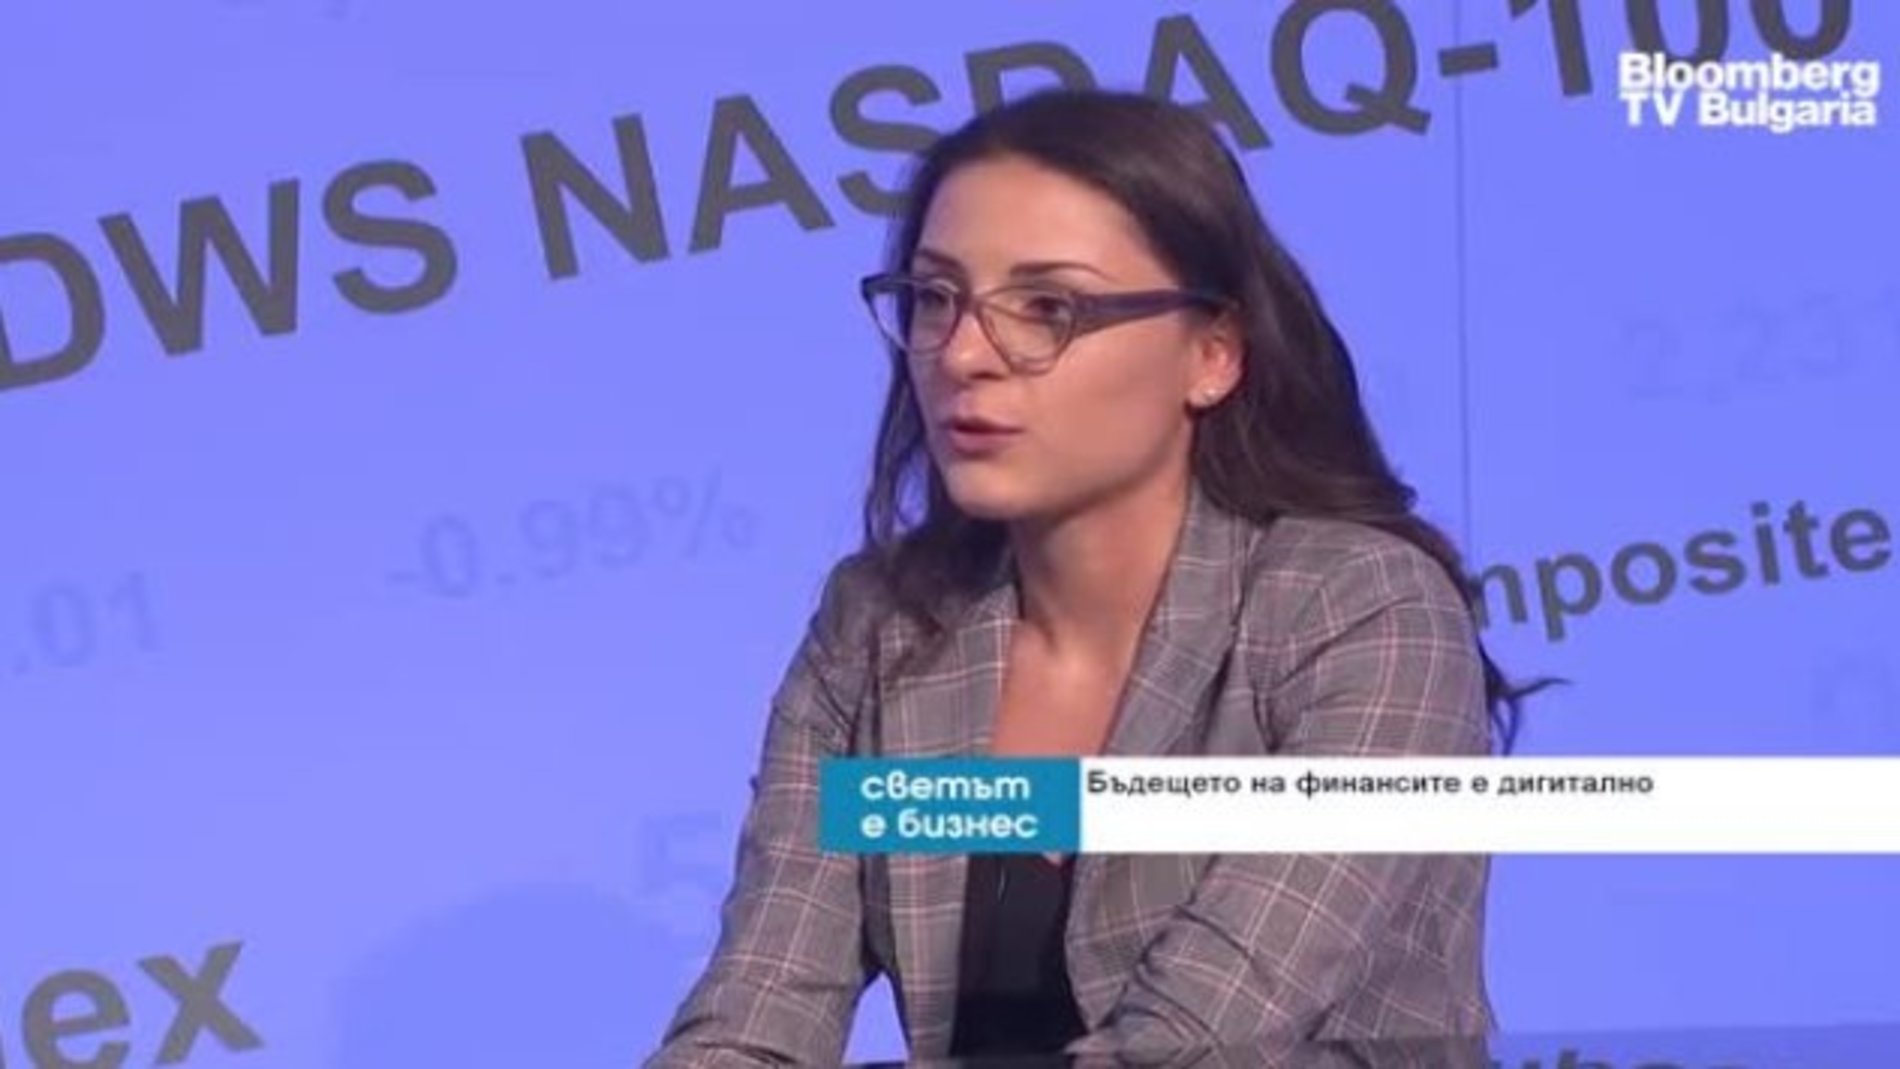 A still from Kalina Tonkovska from INDUSTRIA's interview with Bloomberg TV.